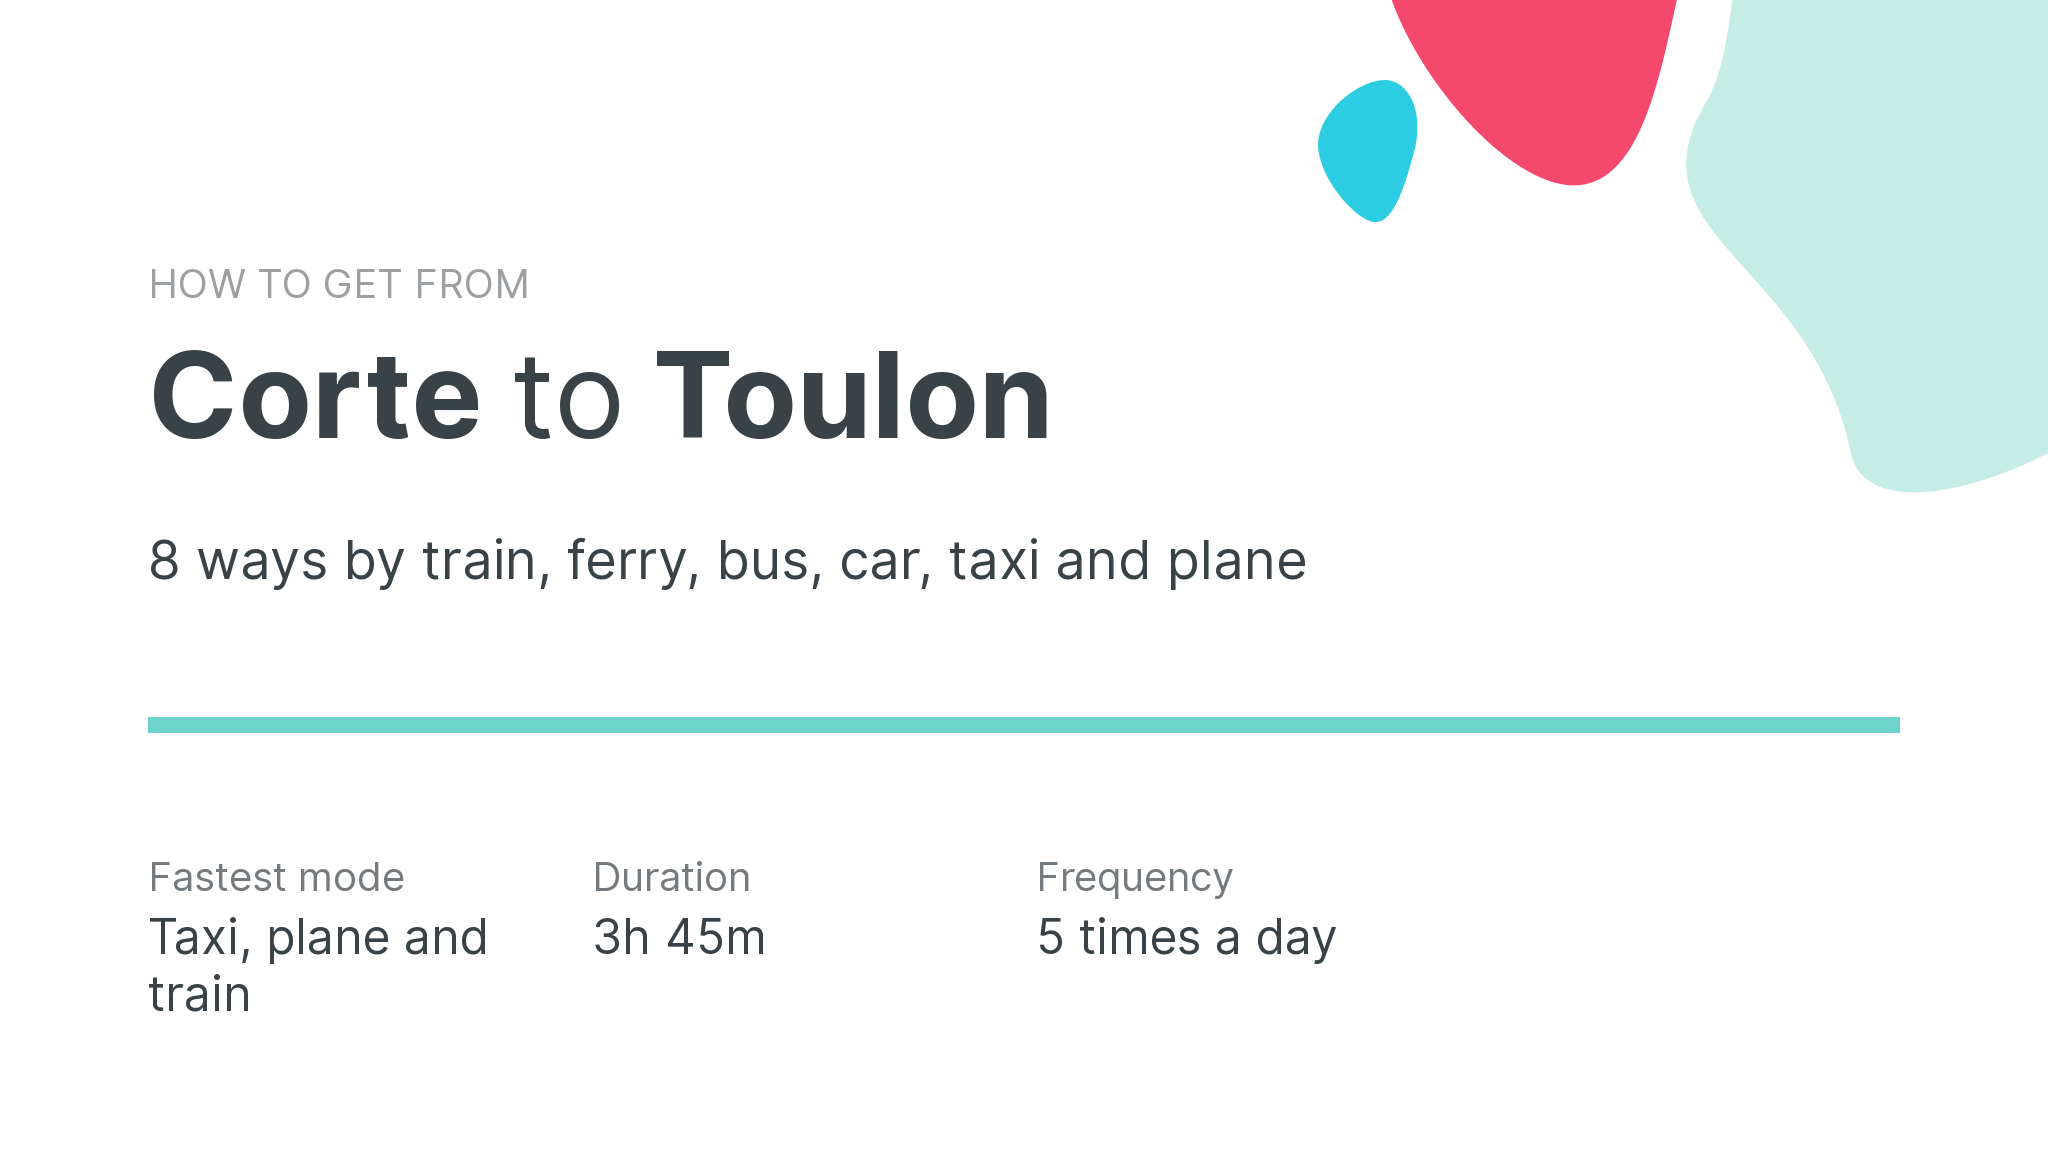 How do I get from Corte to Toulon